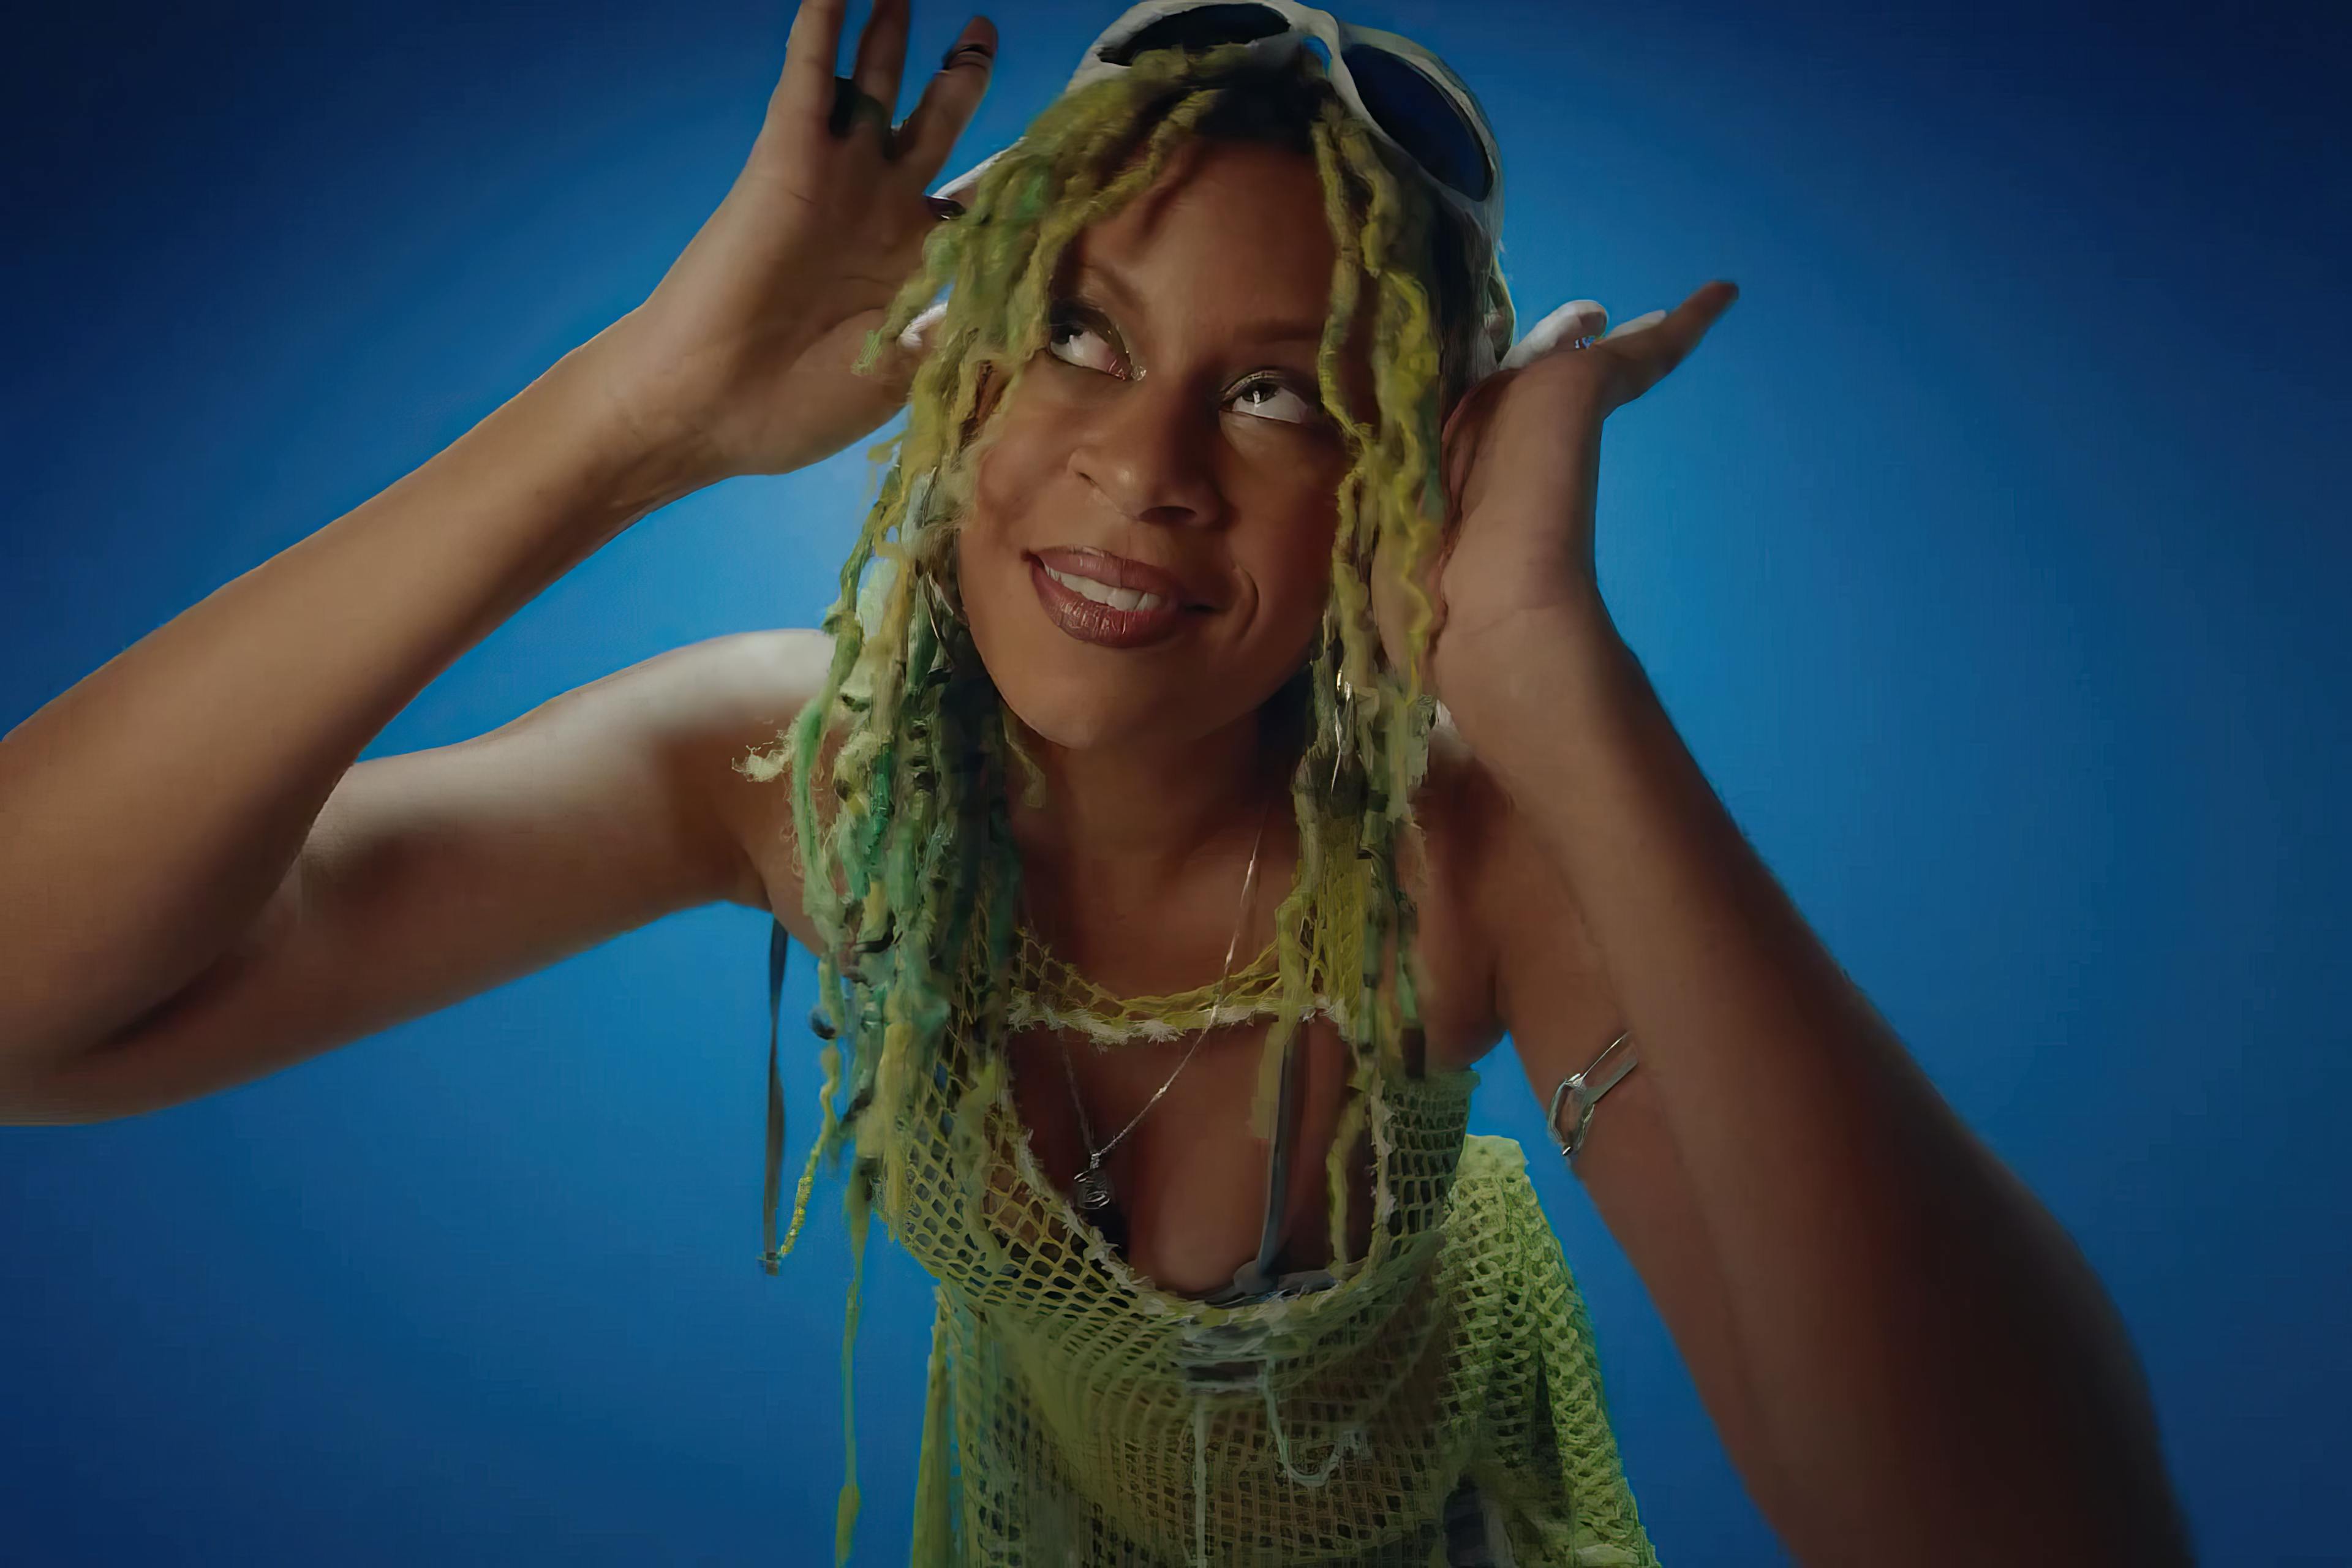 A joyful moment captured in the music video for 'Running Blind' by Aluna, Tchami, & Kareen Lomax. Aluna is seen with a beaming smile, her hands playfully adjusting her green and yellow tinted yarn-like hair. She's wearing a green crocheted top, adding a bright, summery vibe against a solid blue background that accentuates the cheerful and vibrant mood of the scene.